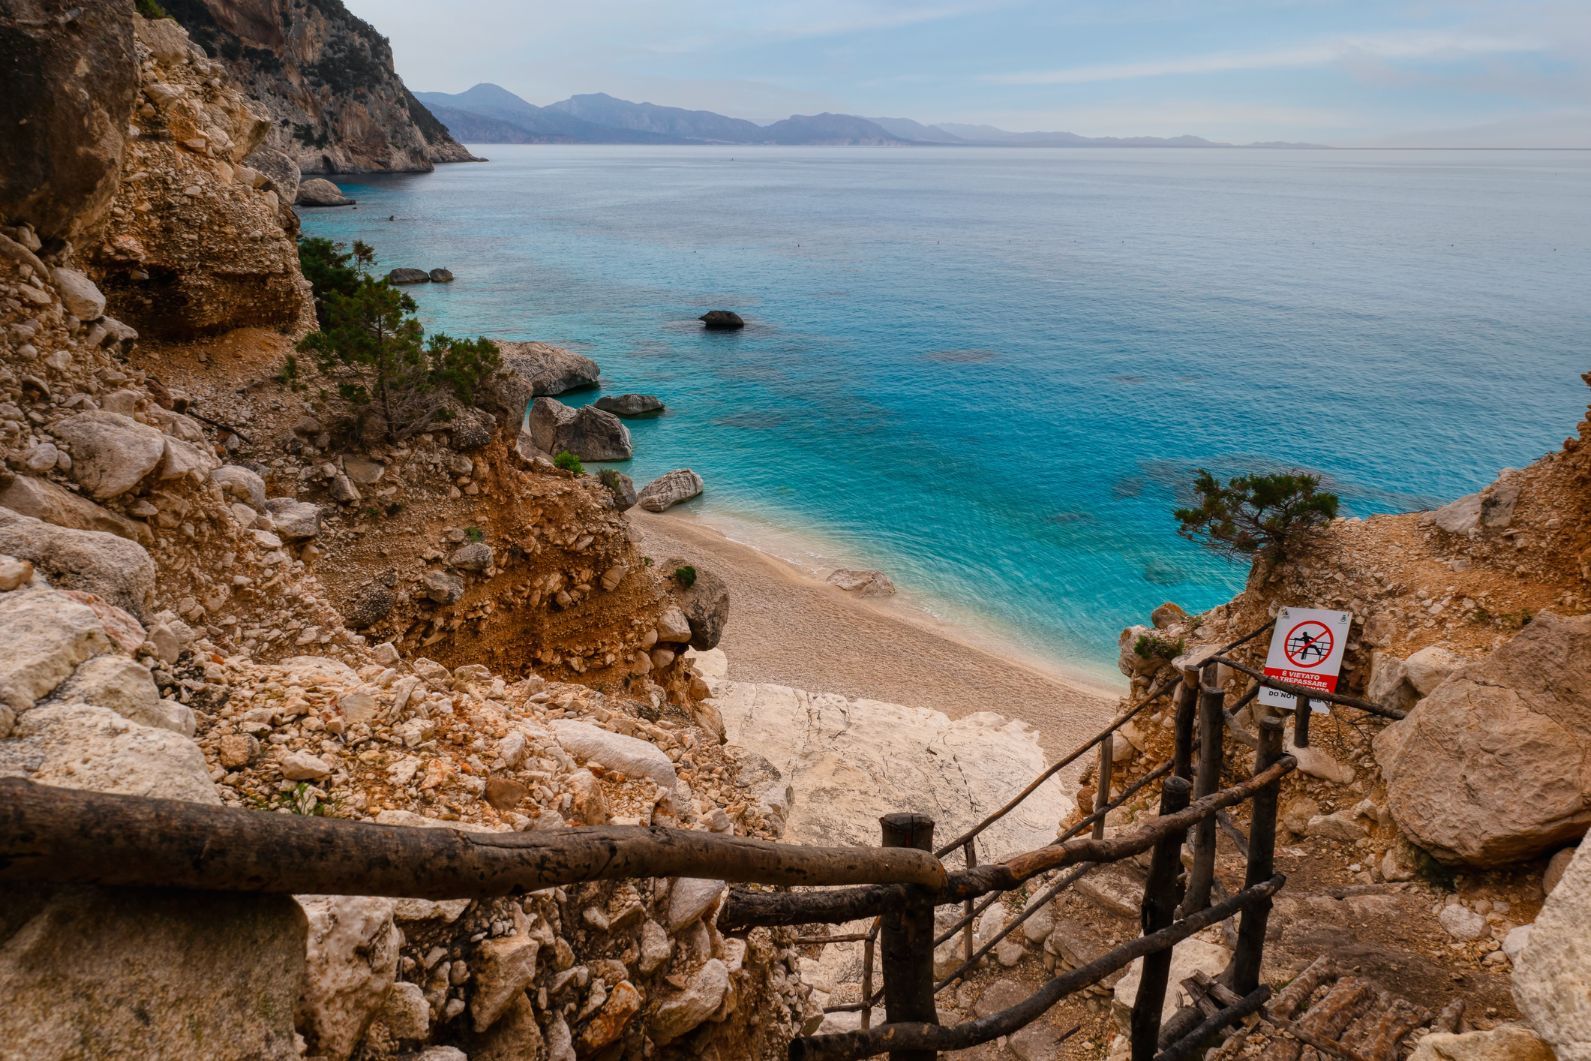 A view of the Mediterranean Sea from the steps of Cala Goloritzè, Sardinia. Photo: Getty